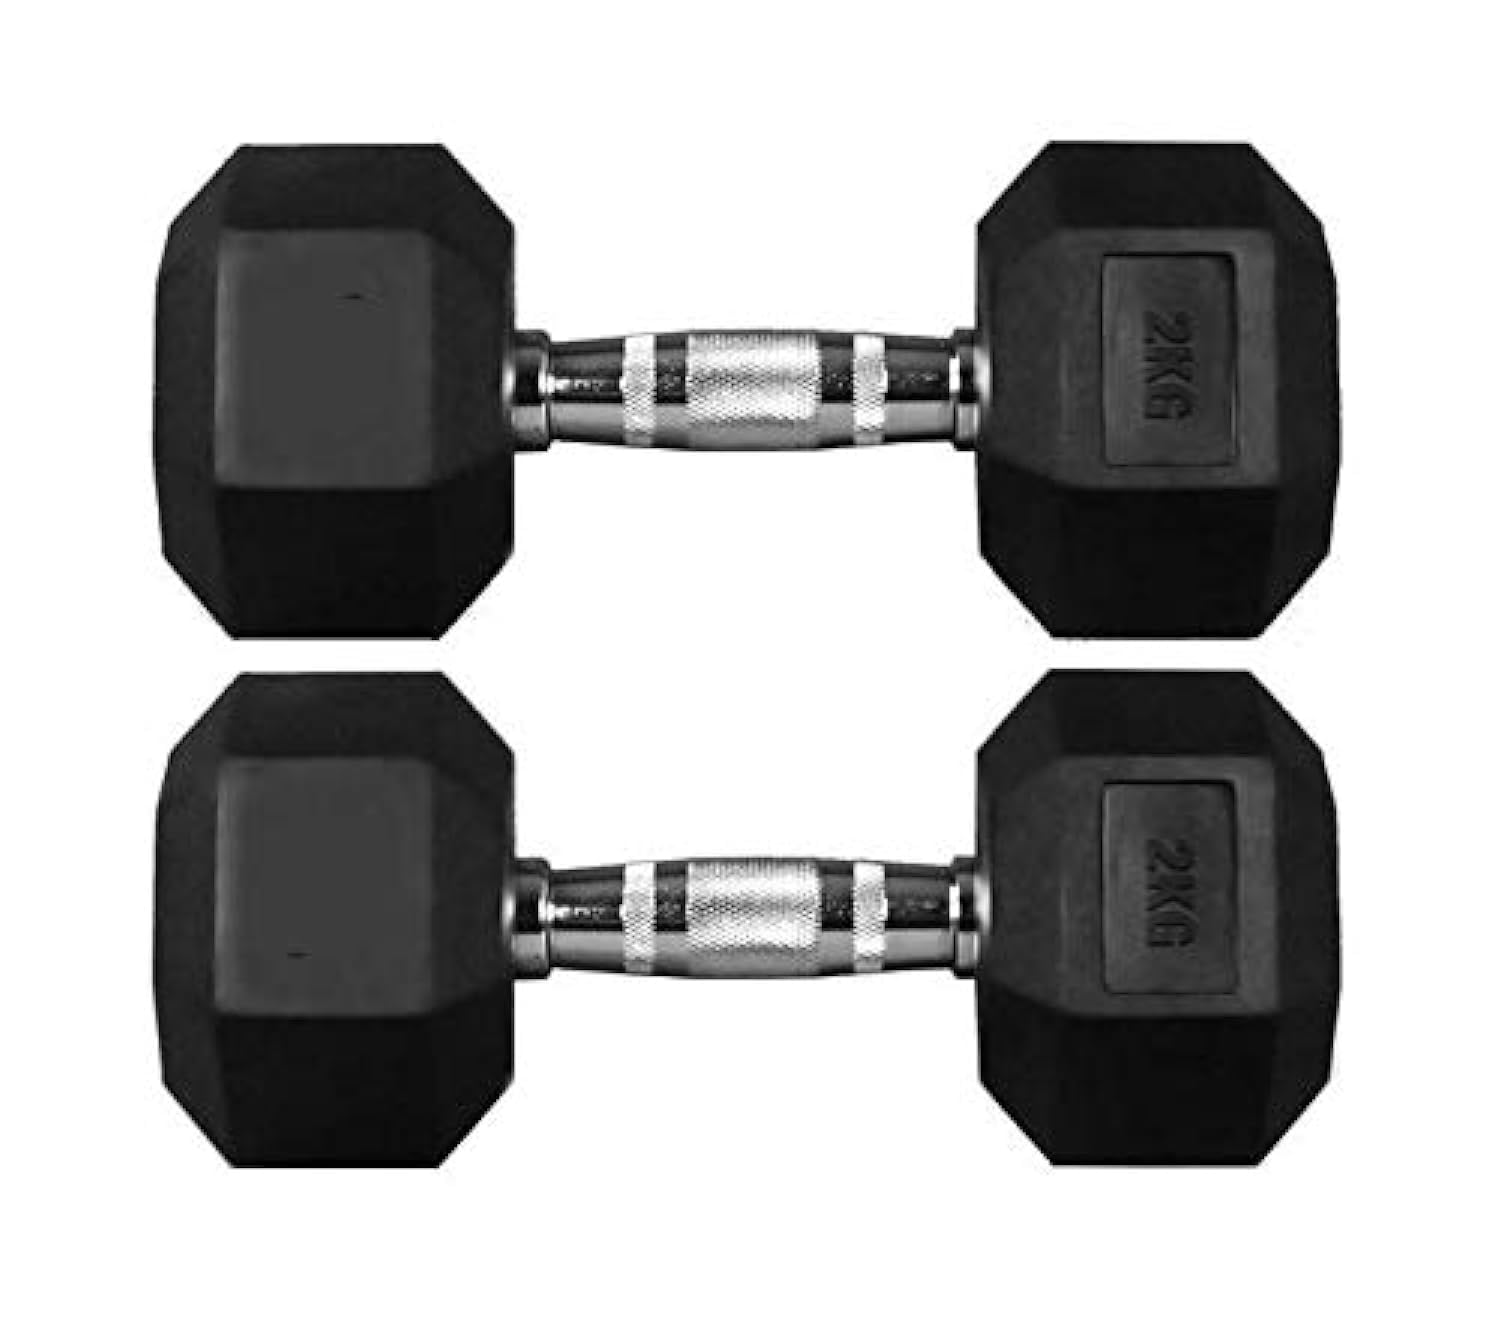 Marshal Fitness Rubber Dumbbell Set of 2 for Sports and Exercise at Home and GYM-2 kgs